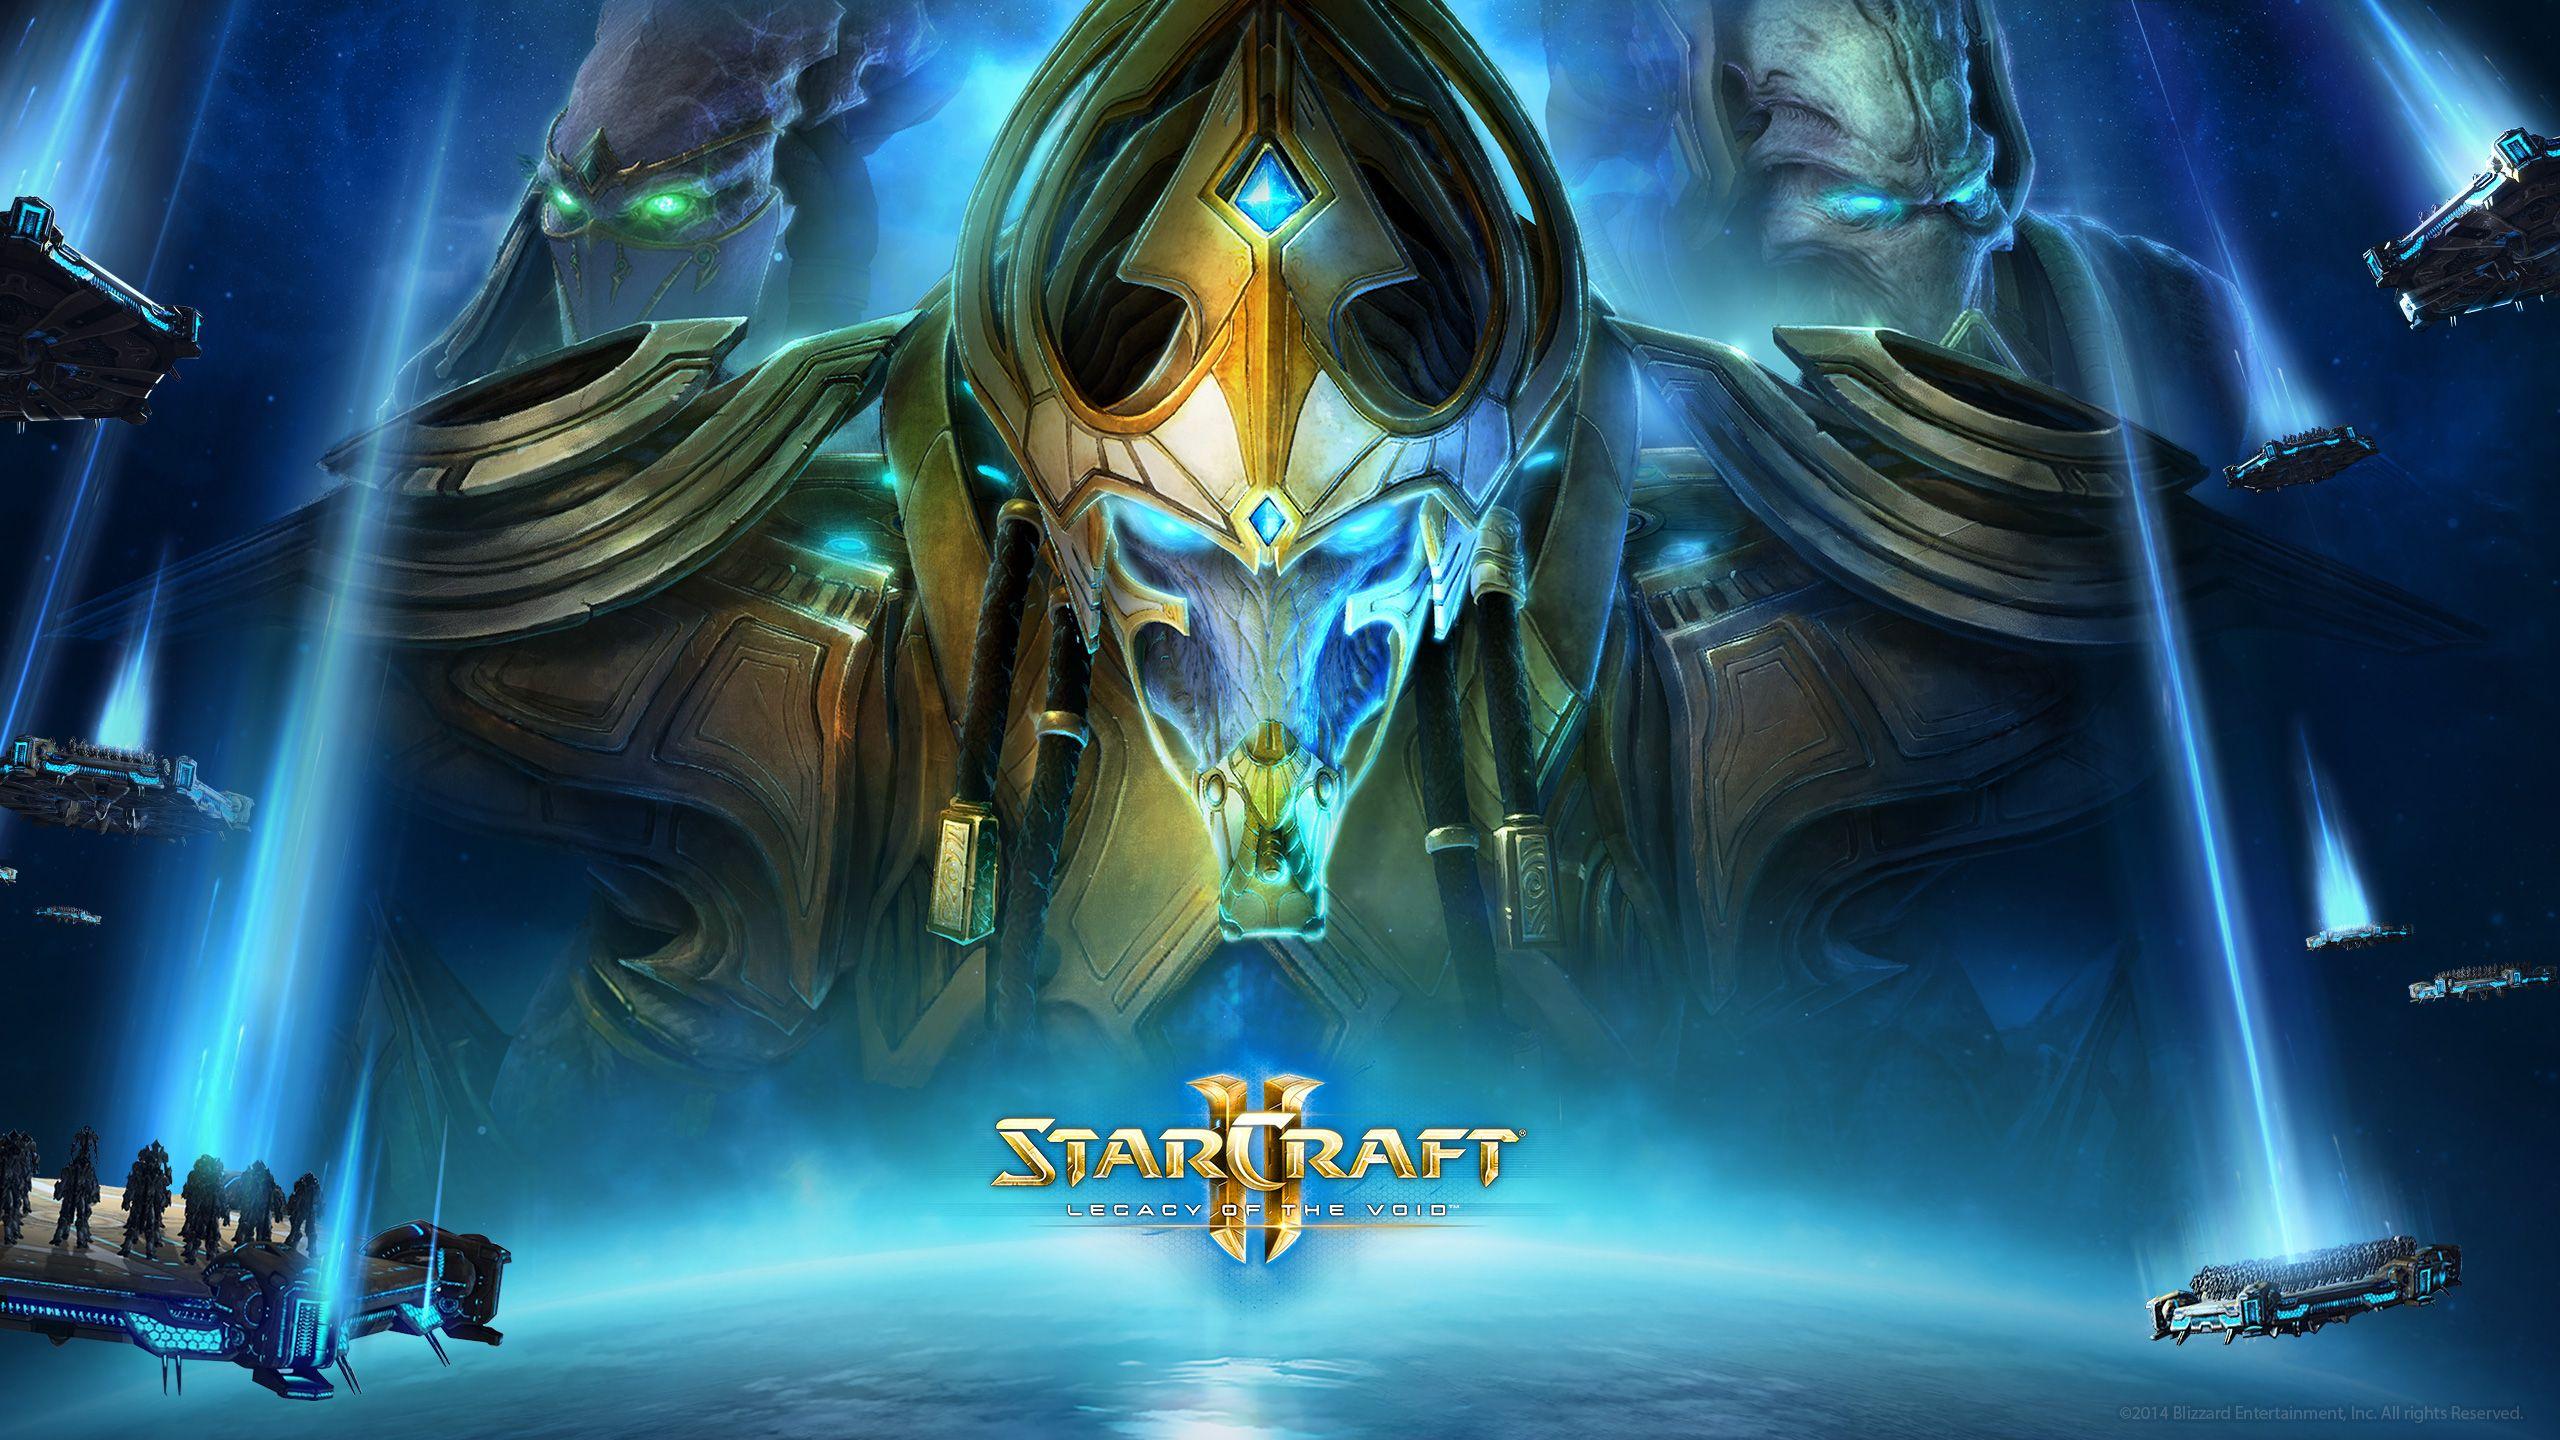 StarCraft 2: Legacy of the Void Wallpaper, Picture, Image